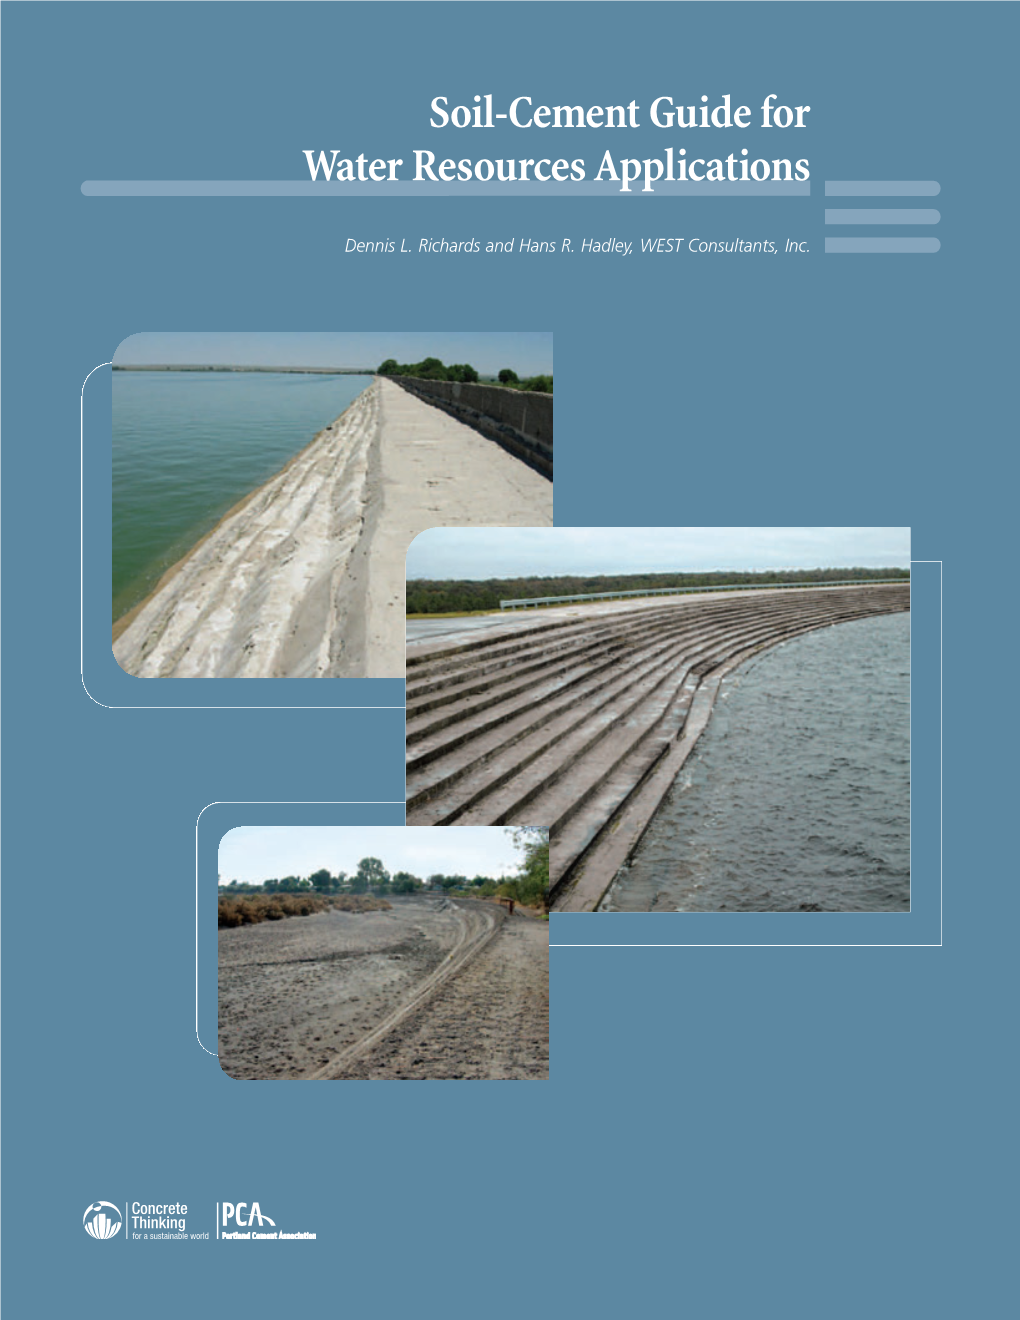 Soil-Cement Guide for Water Resources Applications